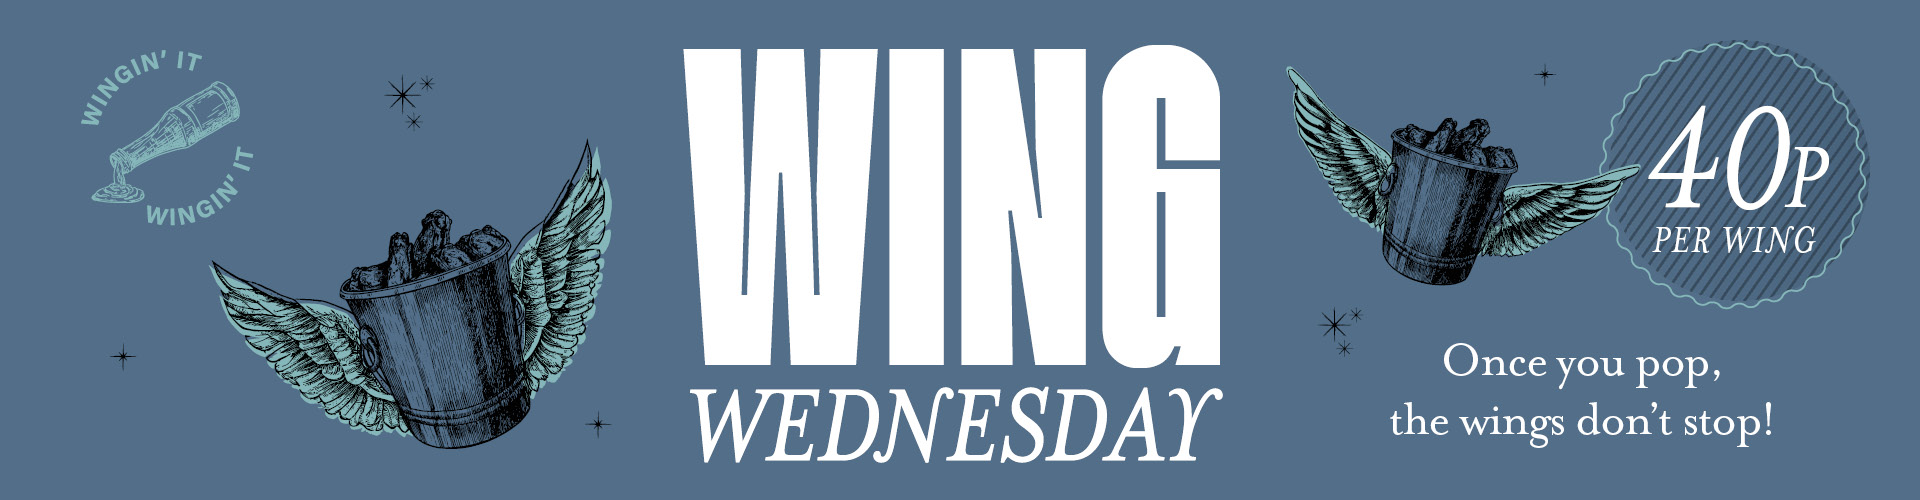 Wing Wednesday | 40p wings every Wednesday